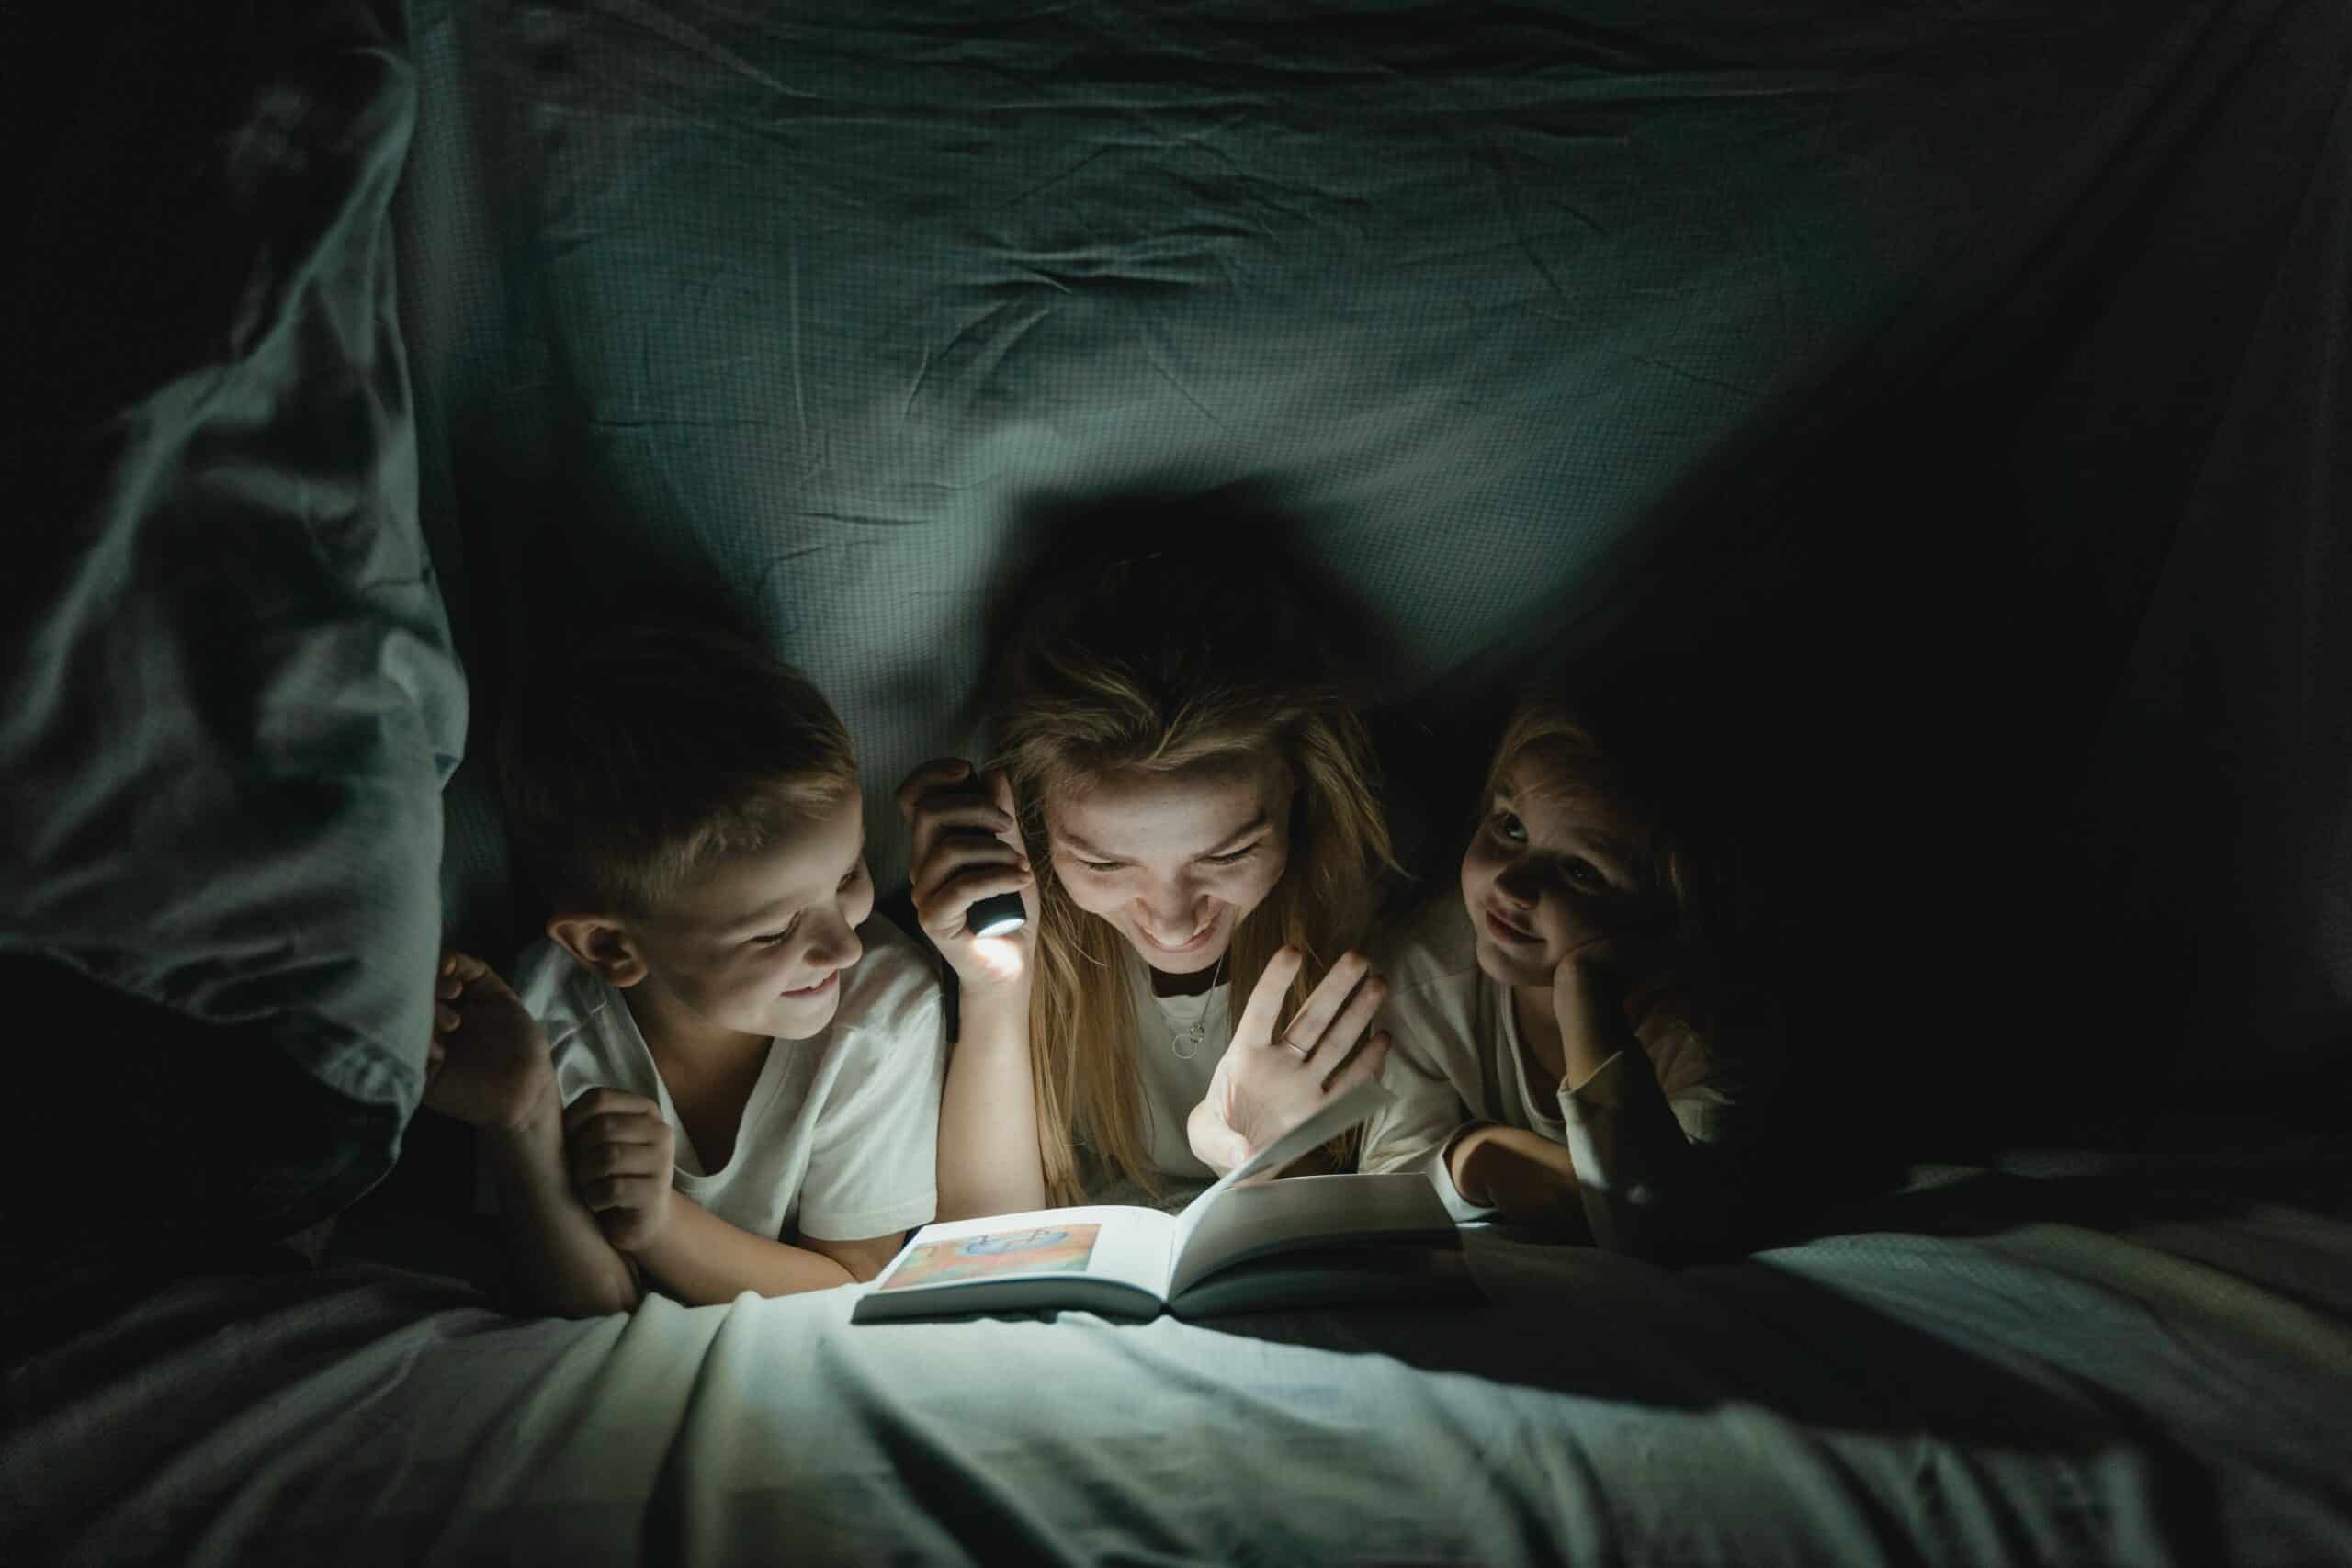 Enthusiastic nanny creating a magical reading moment under the bed sheets with two children using a flashlight, reflecting the nurturing and engaging childcare provided